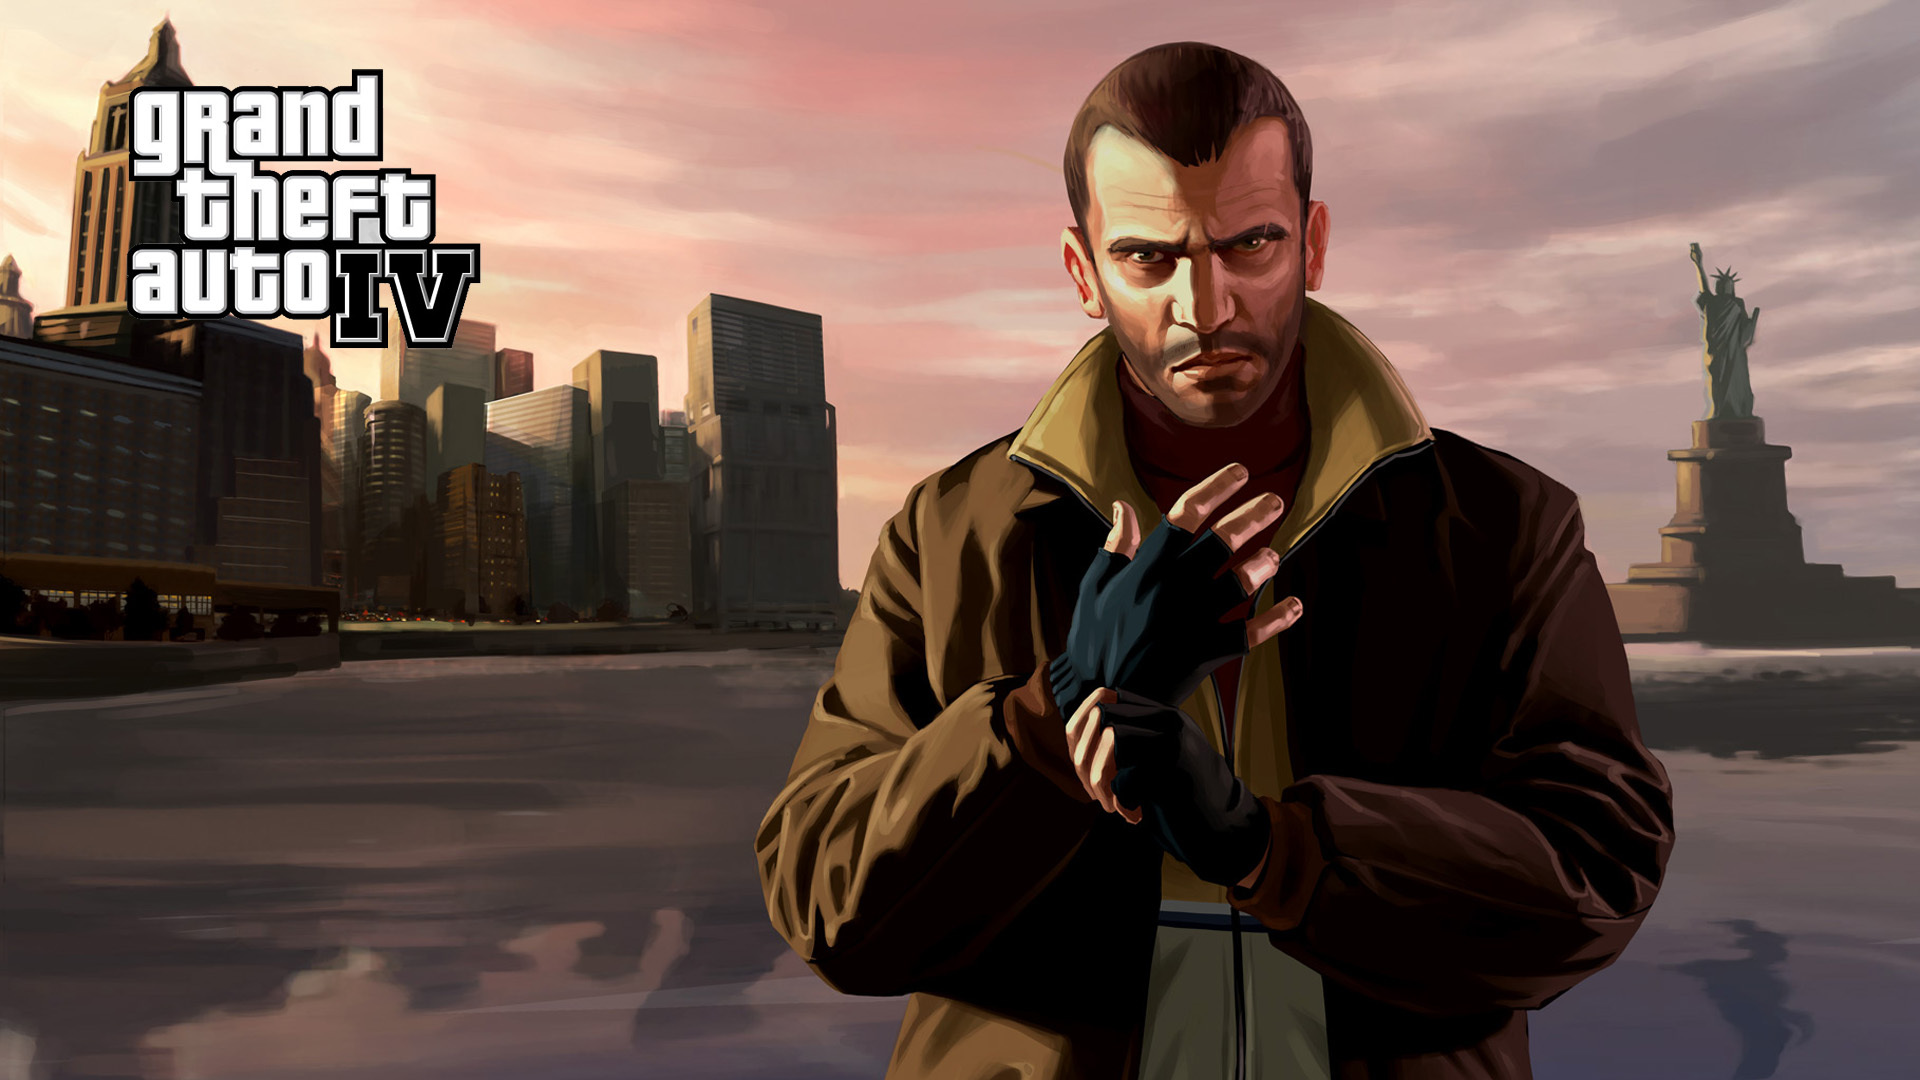 Video Game Grand Theft Auto IV 1920x1080